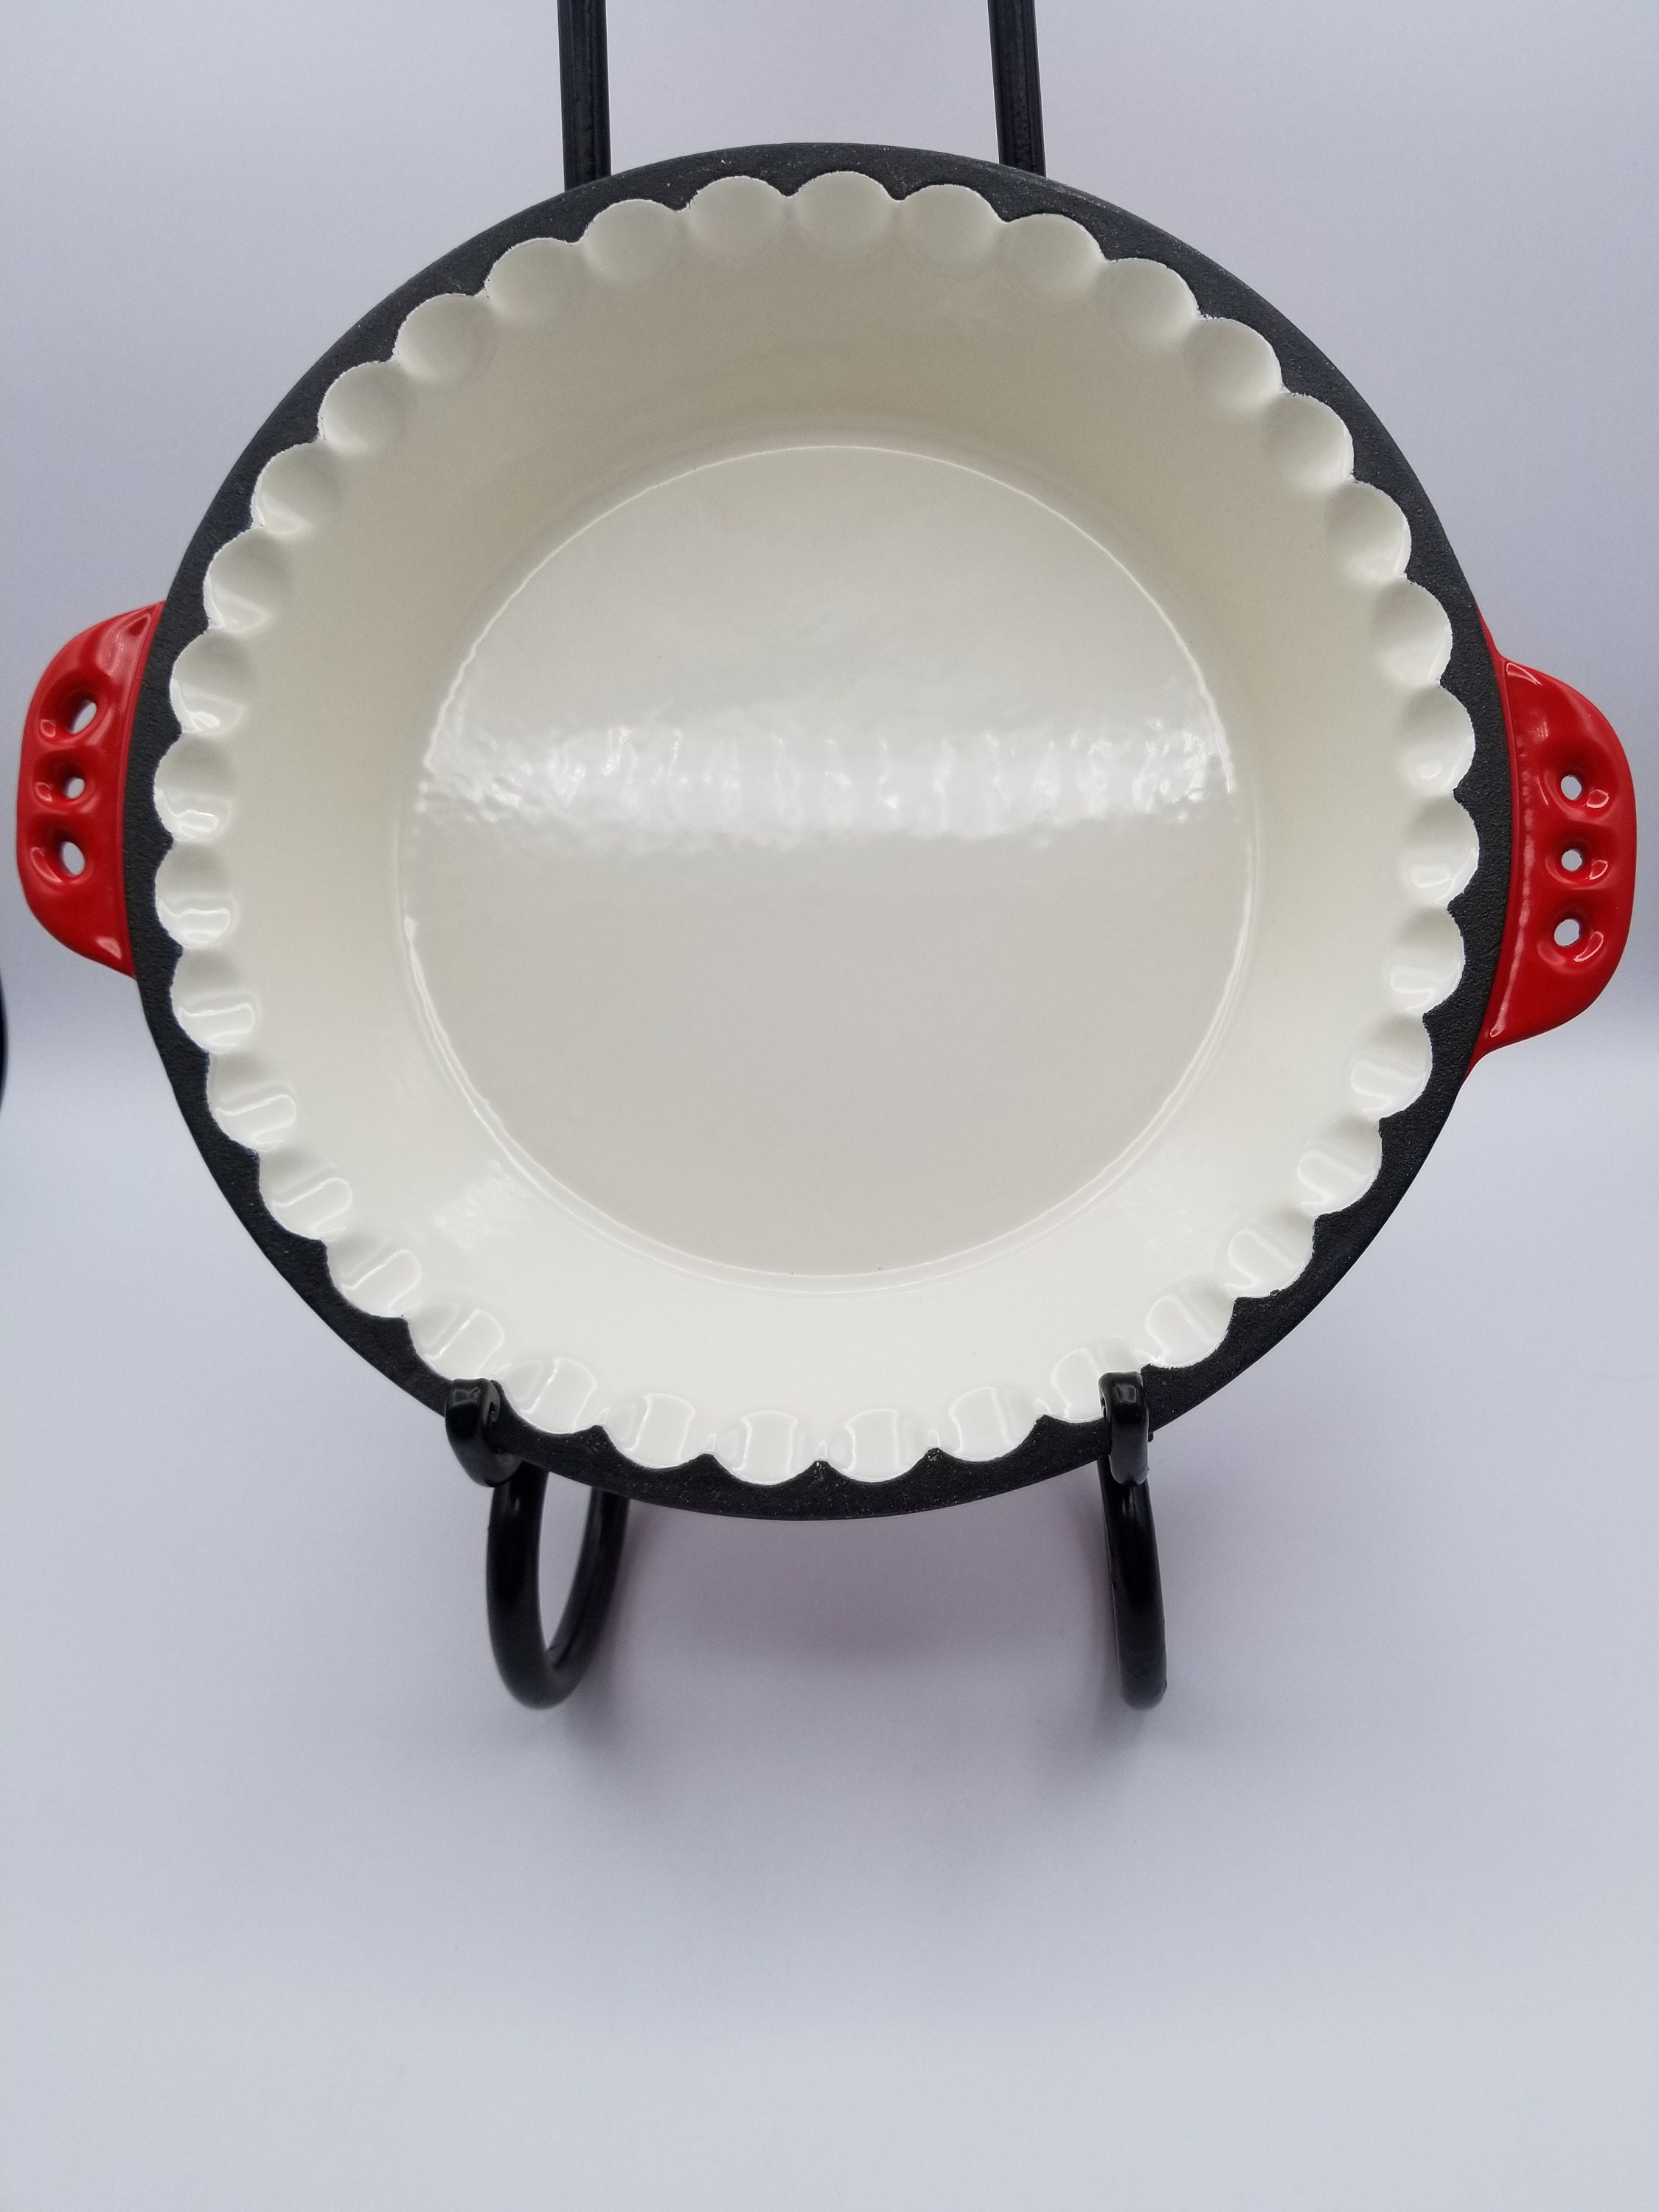 Pie Pan Cuisine and Company Red Enameled Cast Iron Pie Pan 10.25 